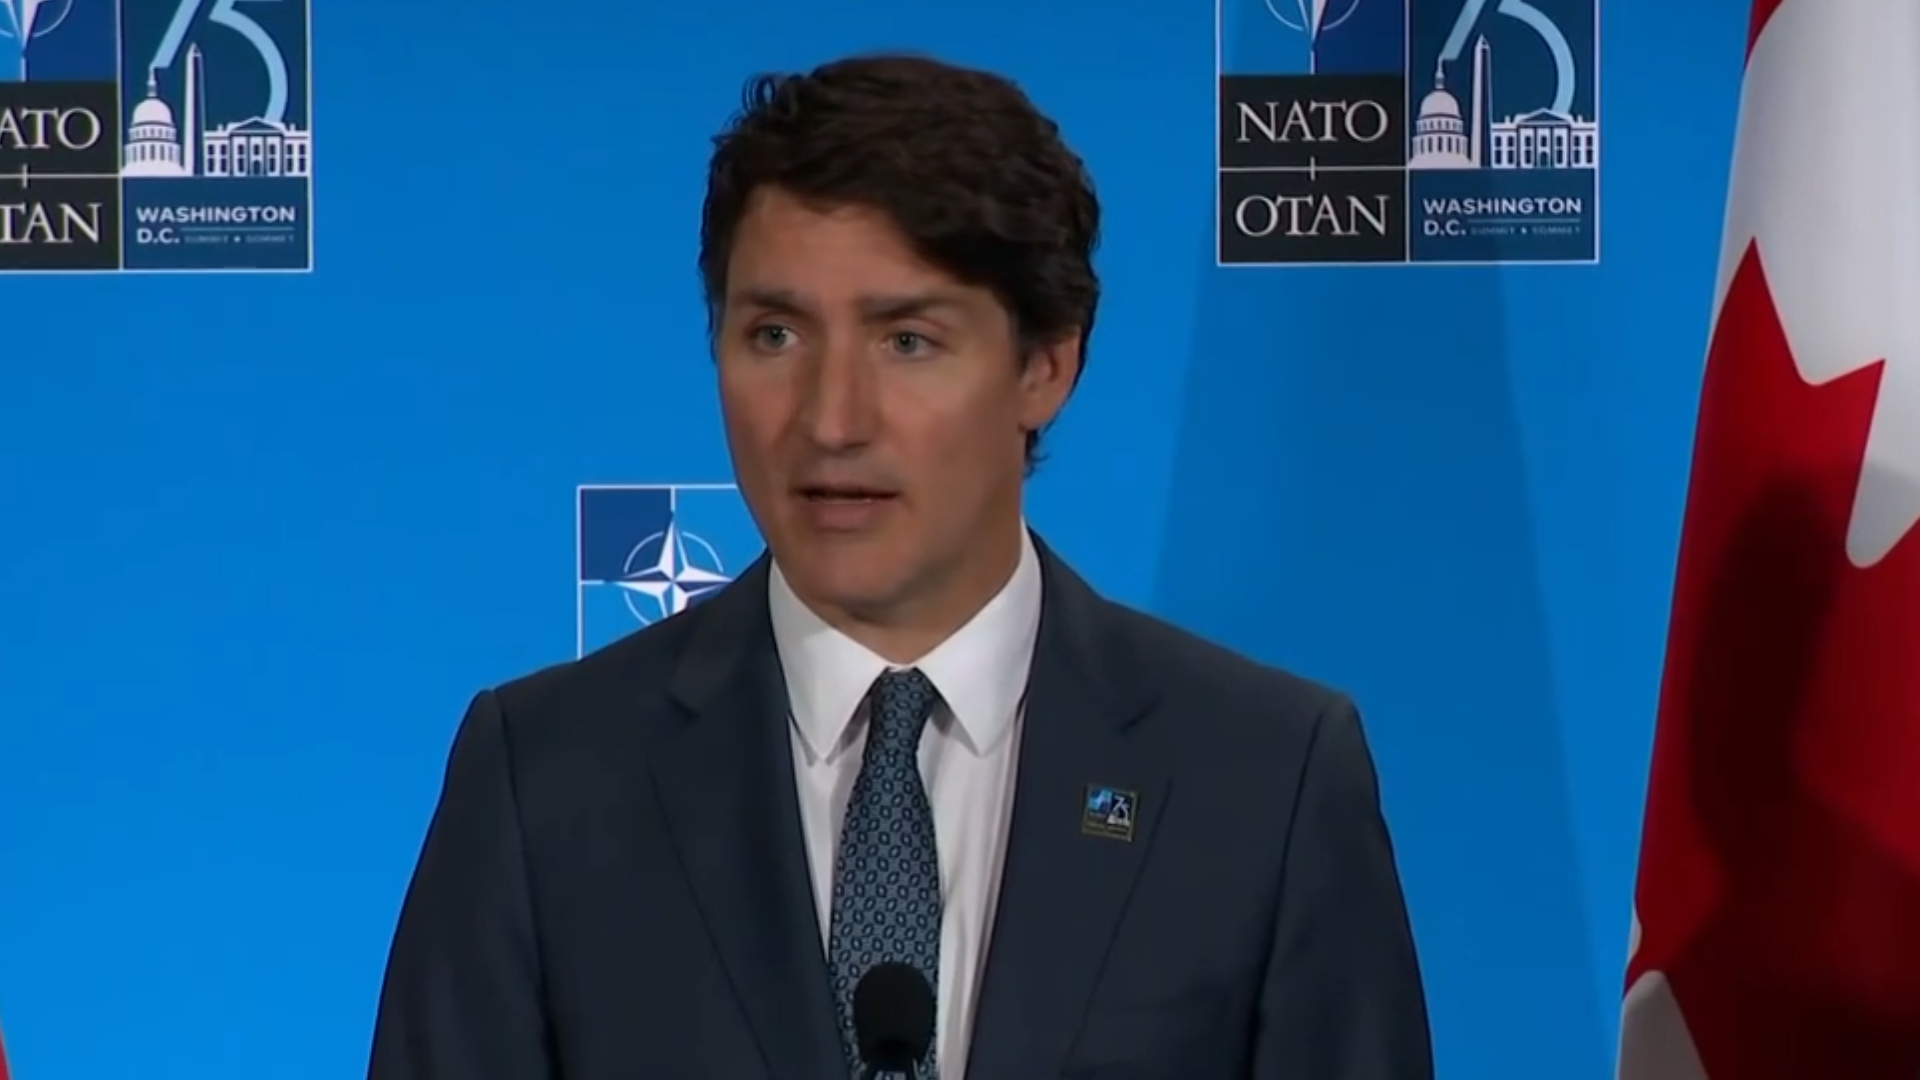 Prime Minister Trudeau promises increase in military spending to hit NATO targets